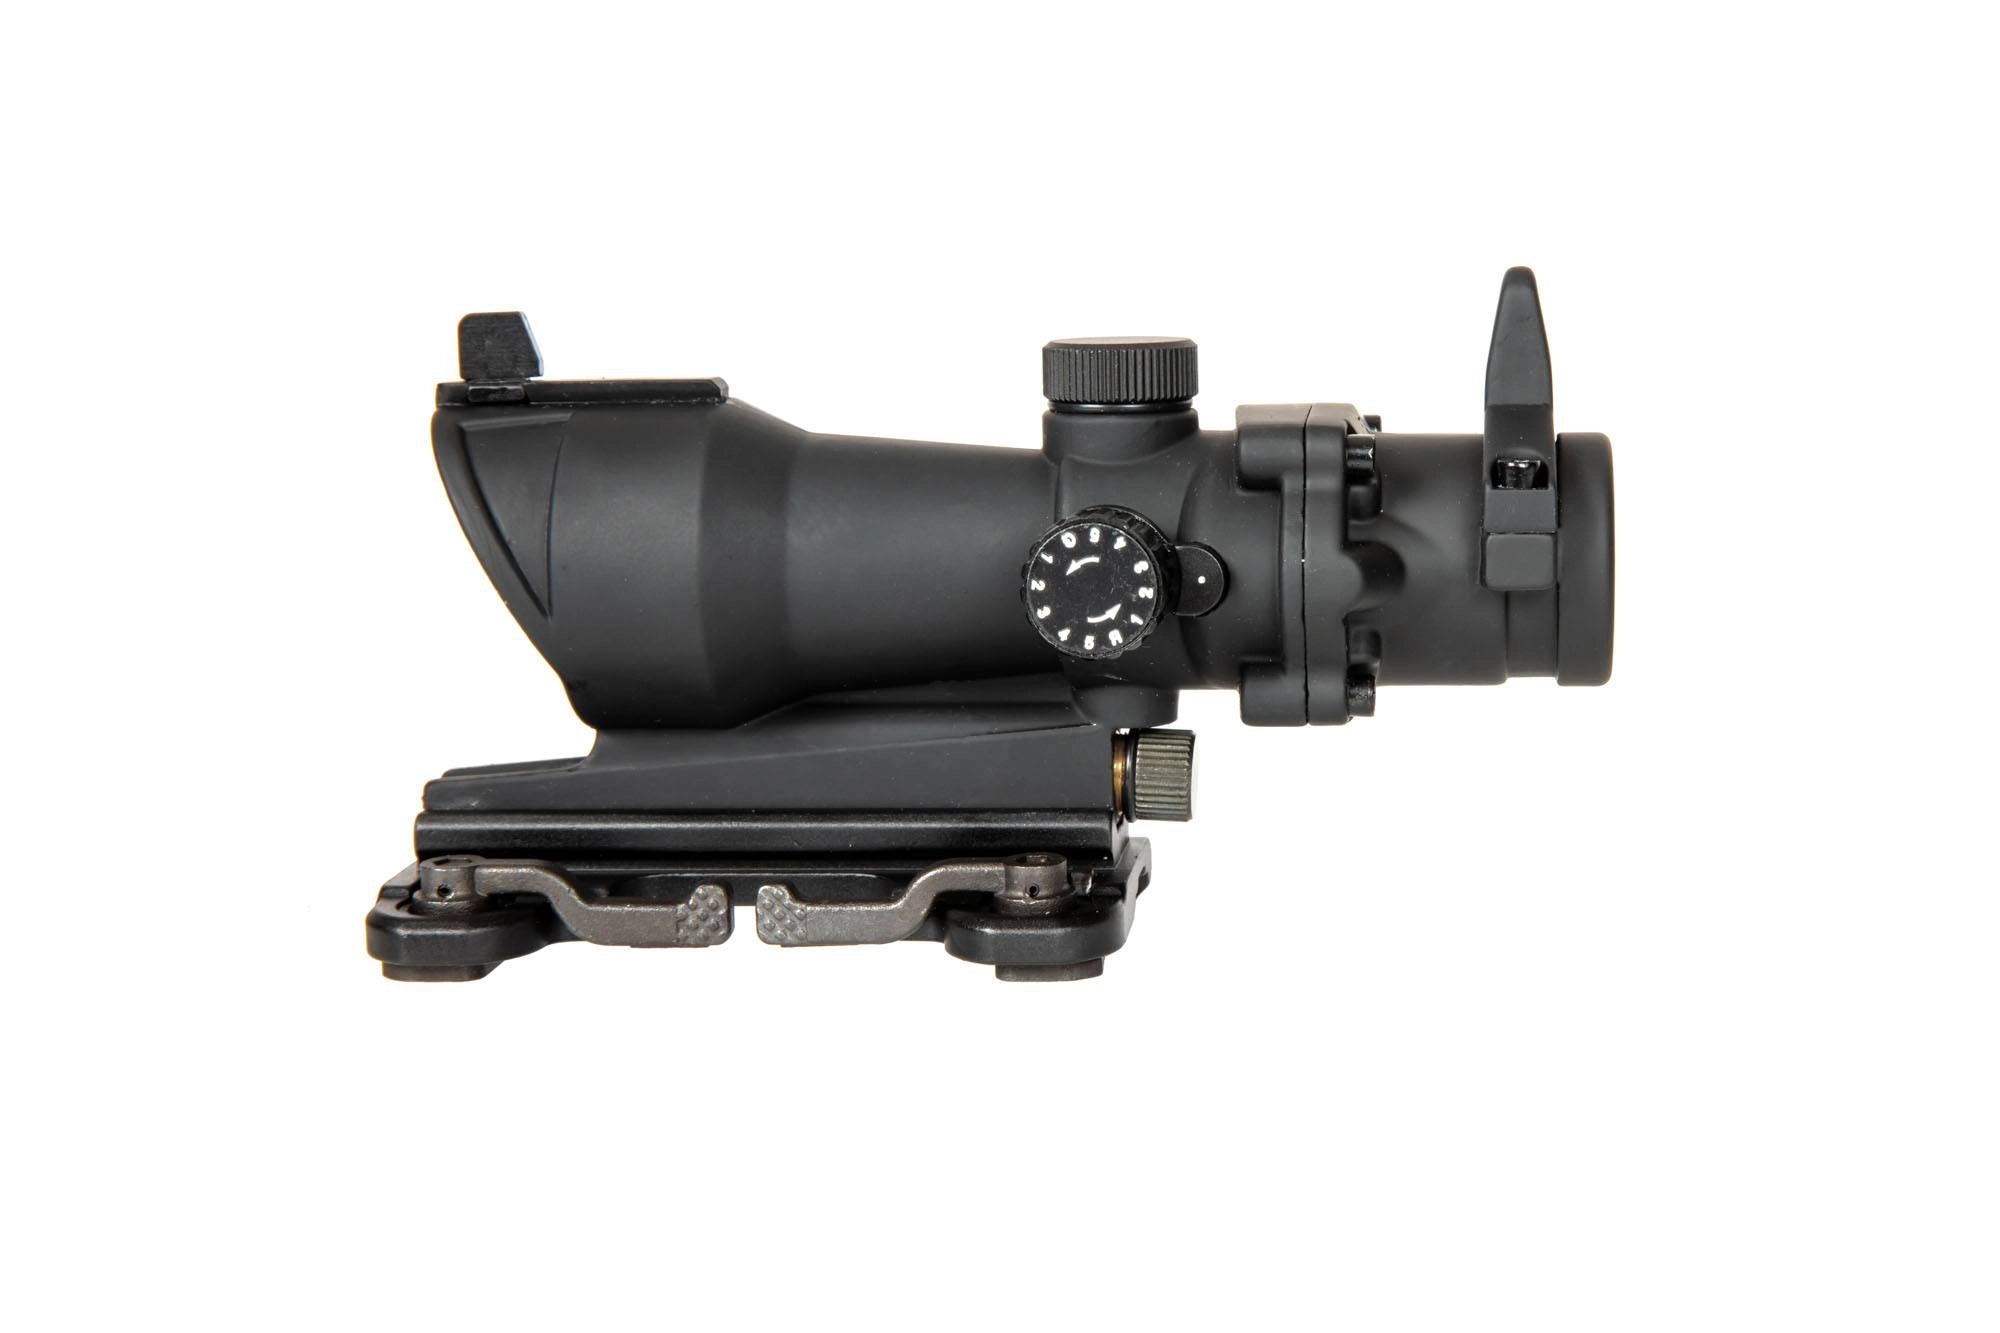 ACOG Style 4x32 Scope Replica with Lighting and QD Mount - Black-2